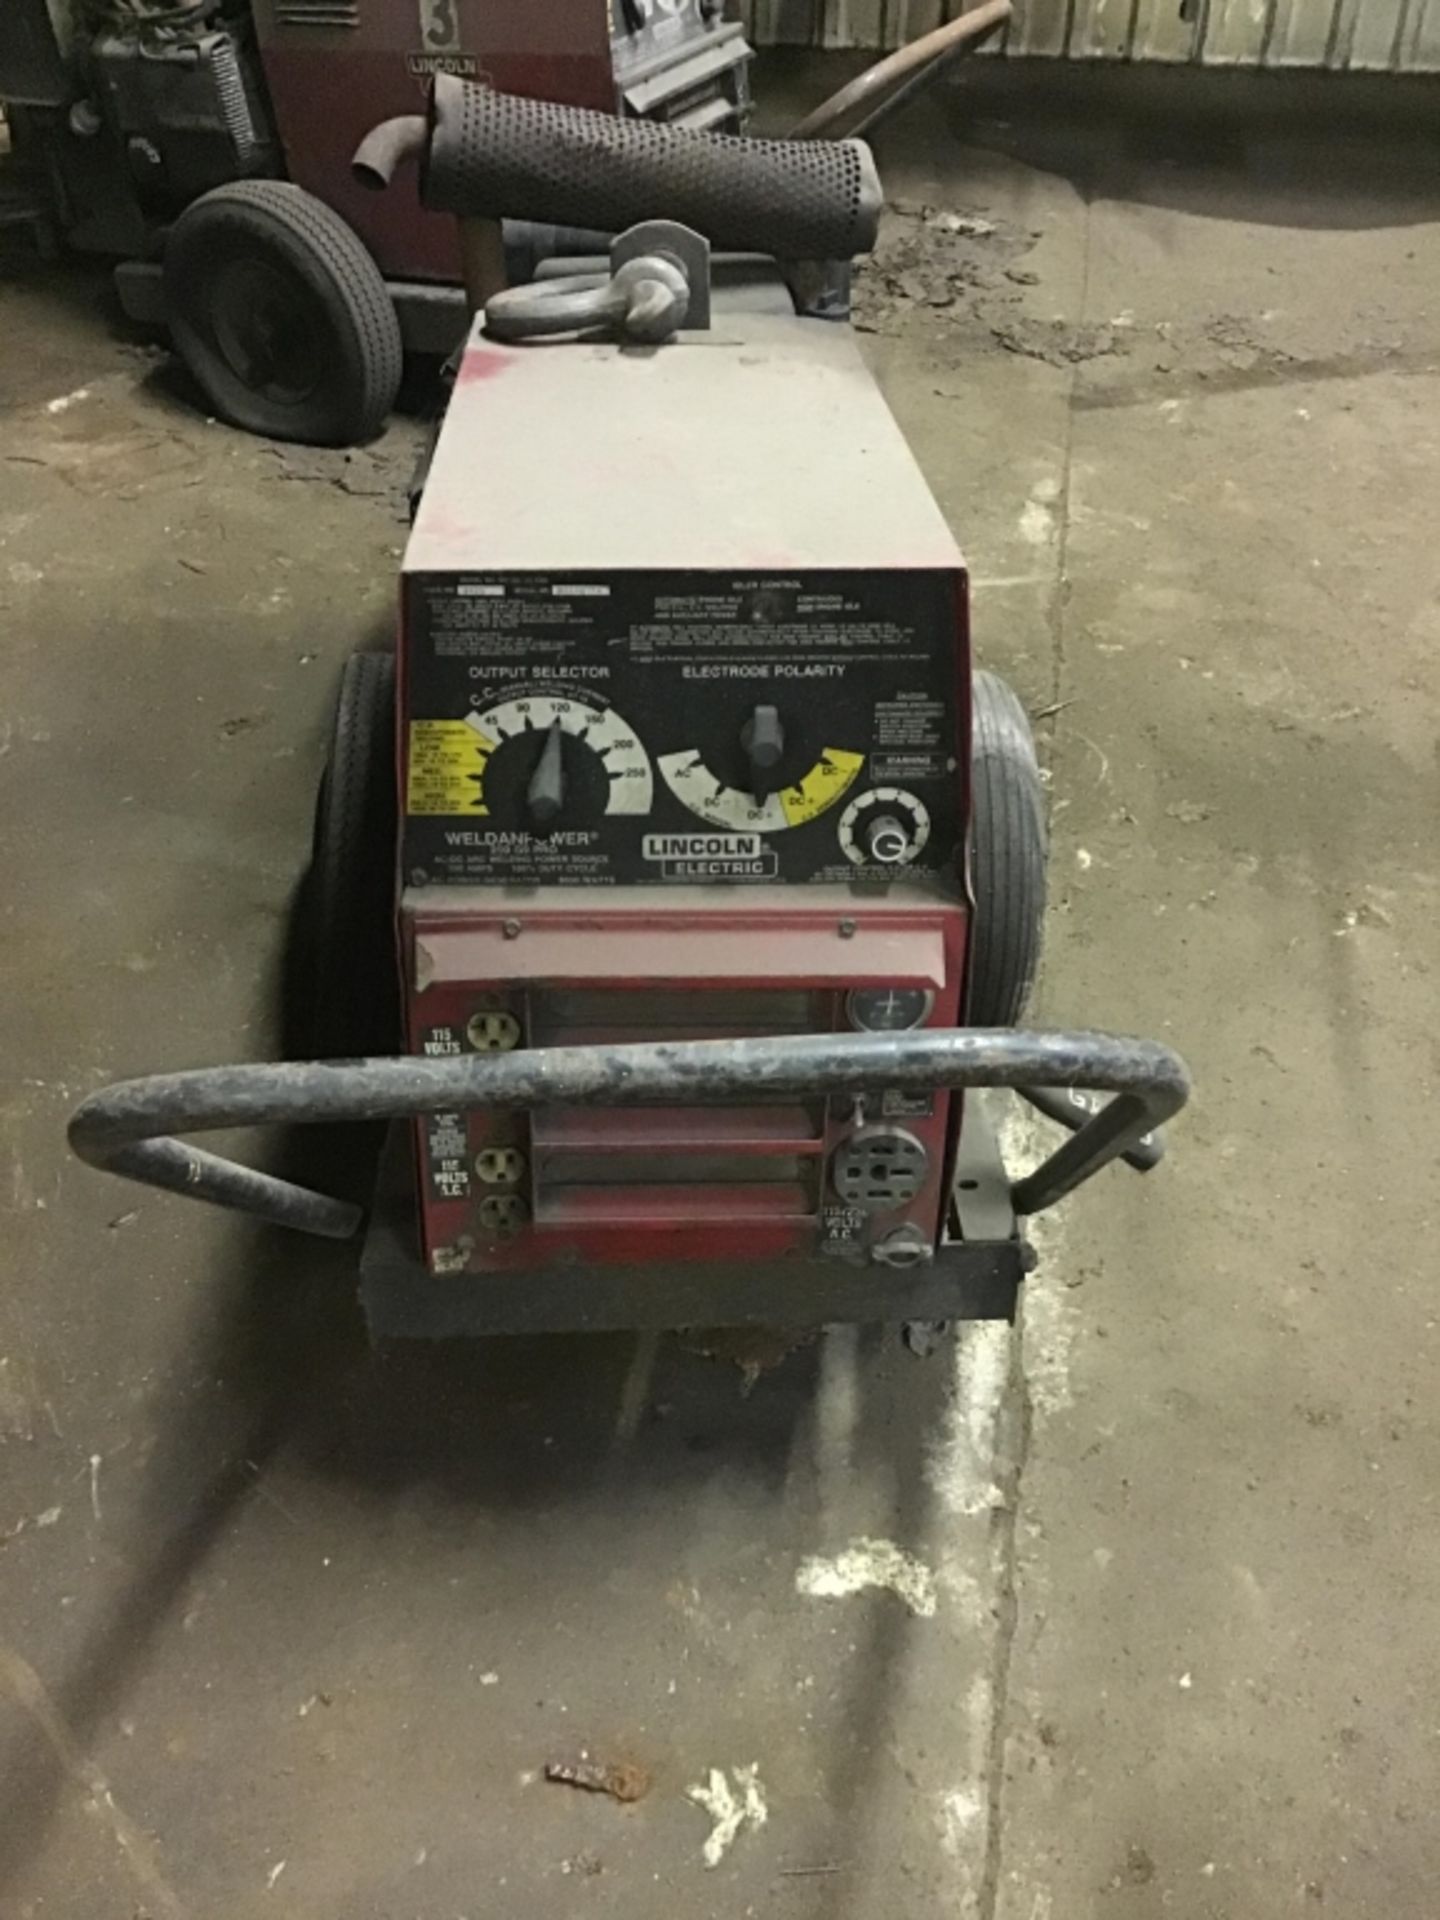 Lincoln Weld and power 250 G9 Pro AC/DC arc welding power source 9,000 watts